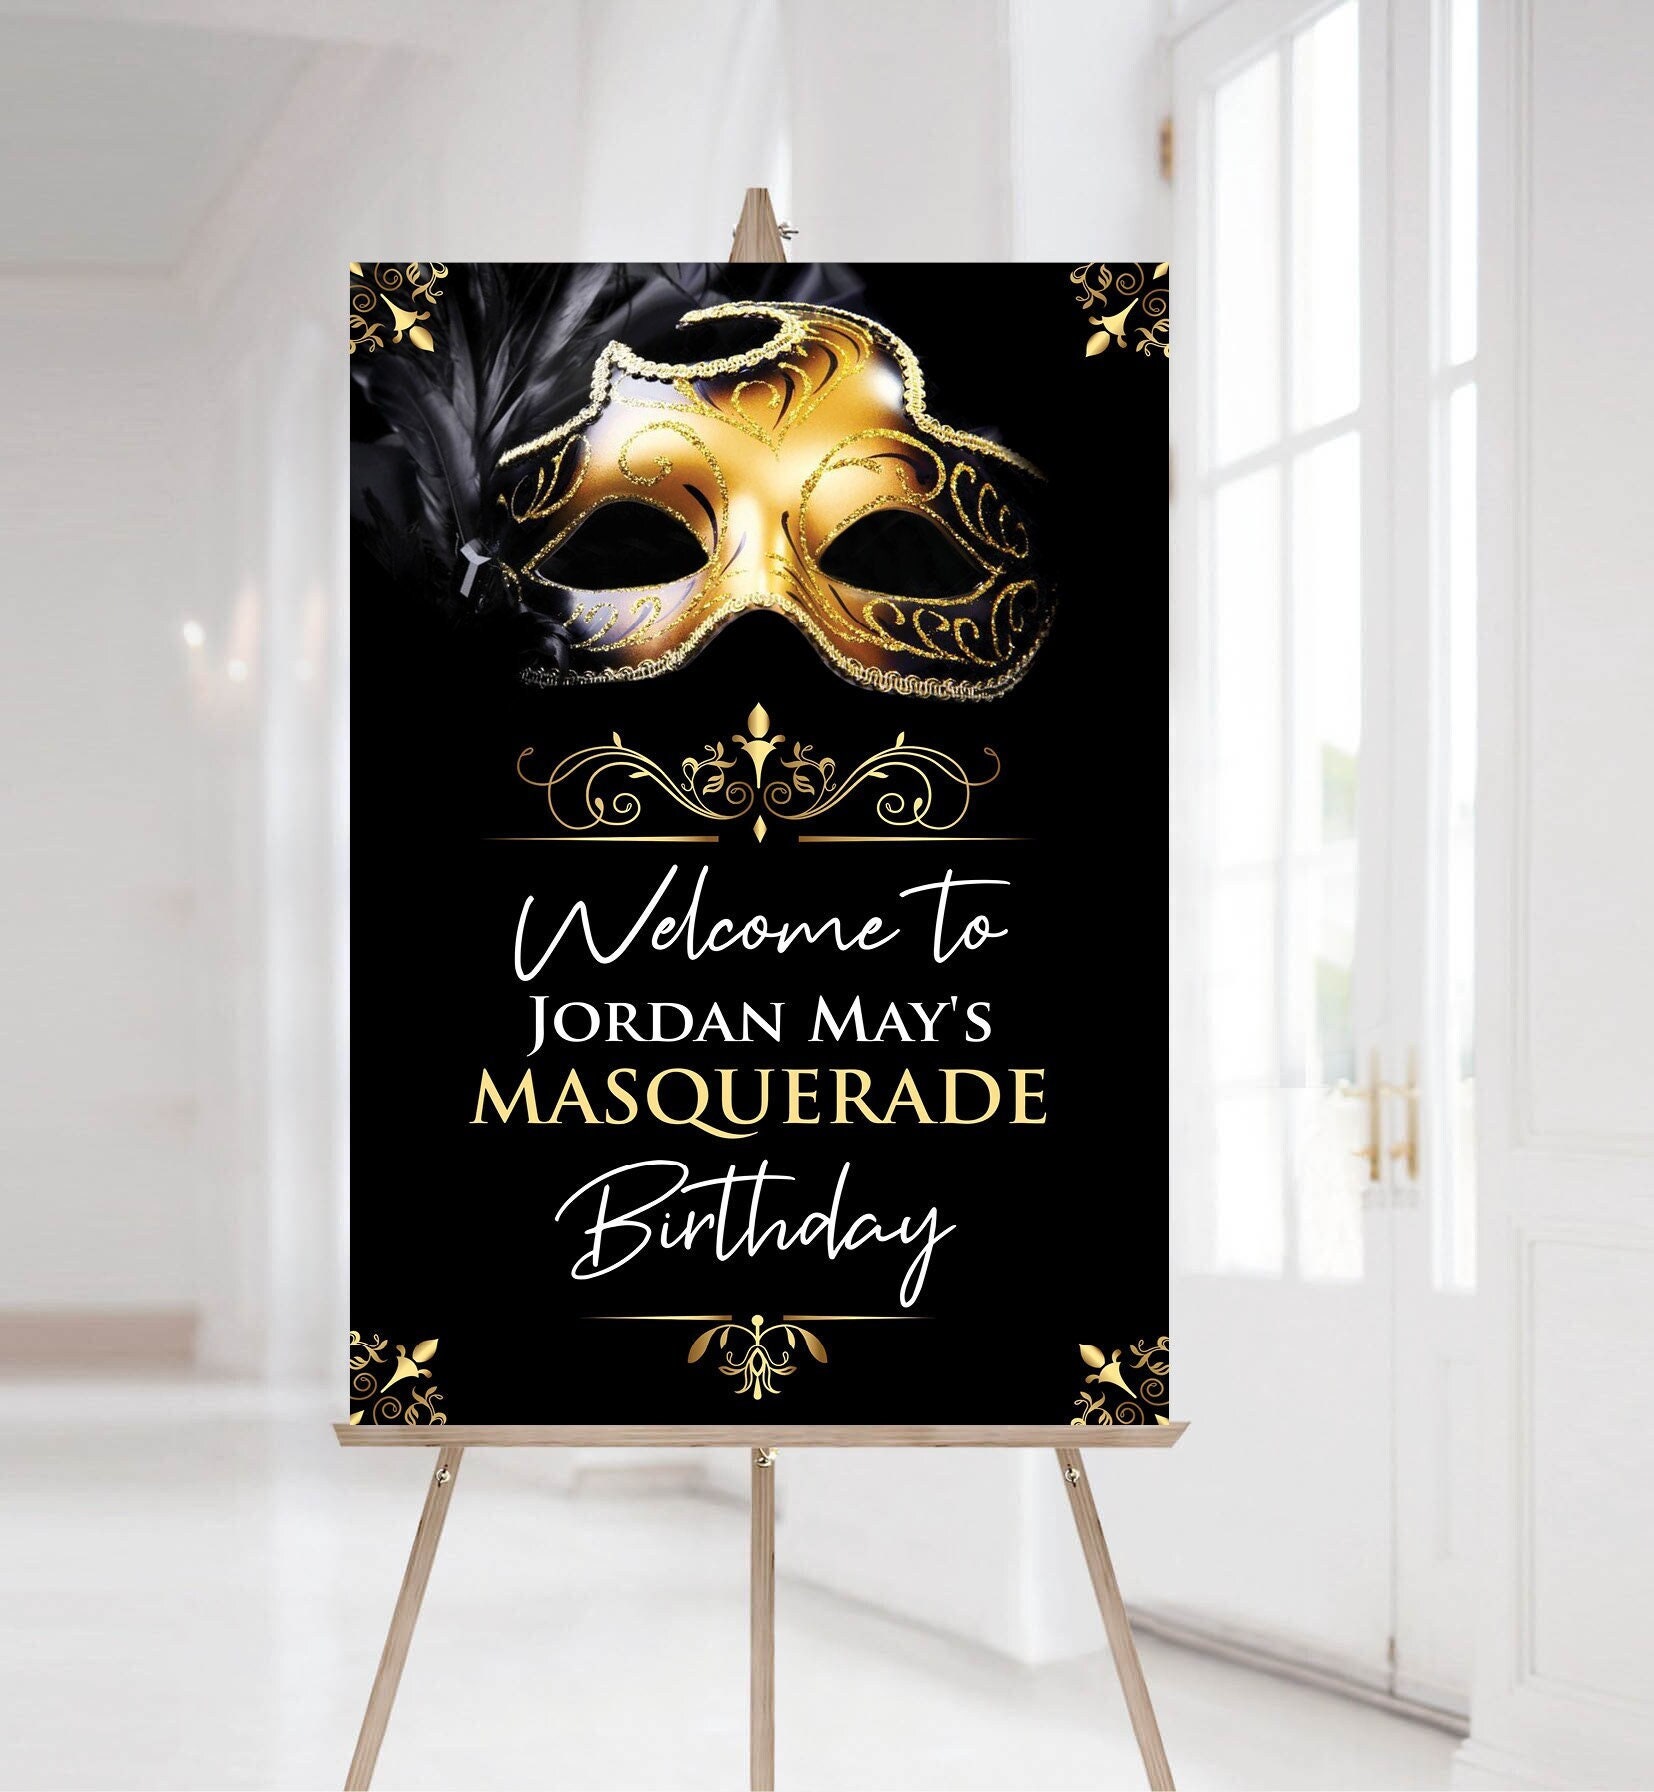  Masquerade Birthday Party Sign, Custom Masquerade Birthday  Sign, Personalized Ball Welcome Decoration Poster, Great Gatsby Birthday  Photo Props, Masquerade Decorations : Handmade Products